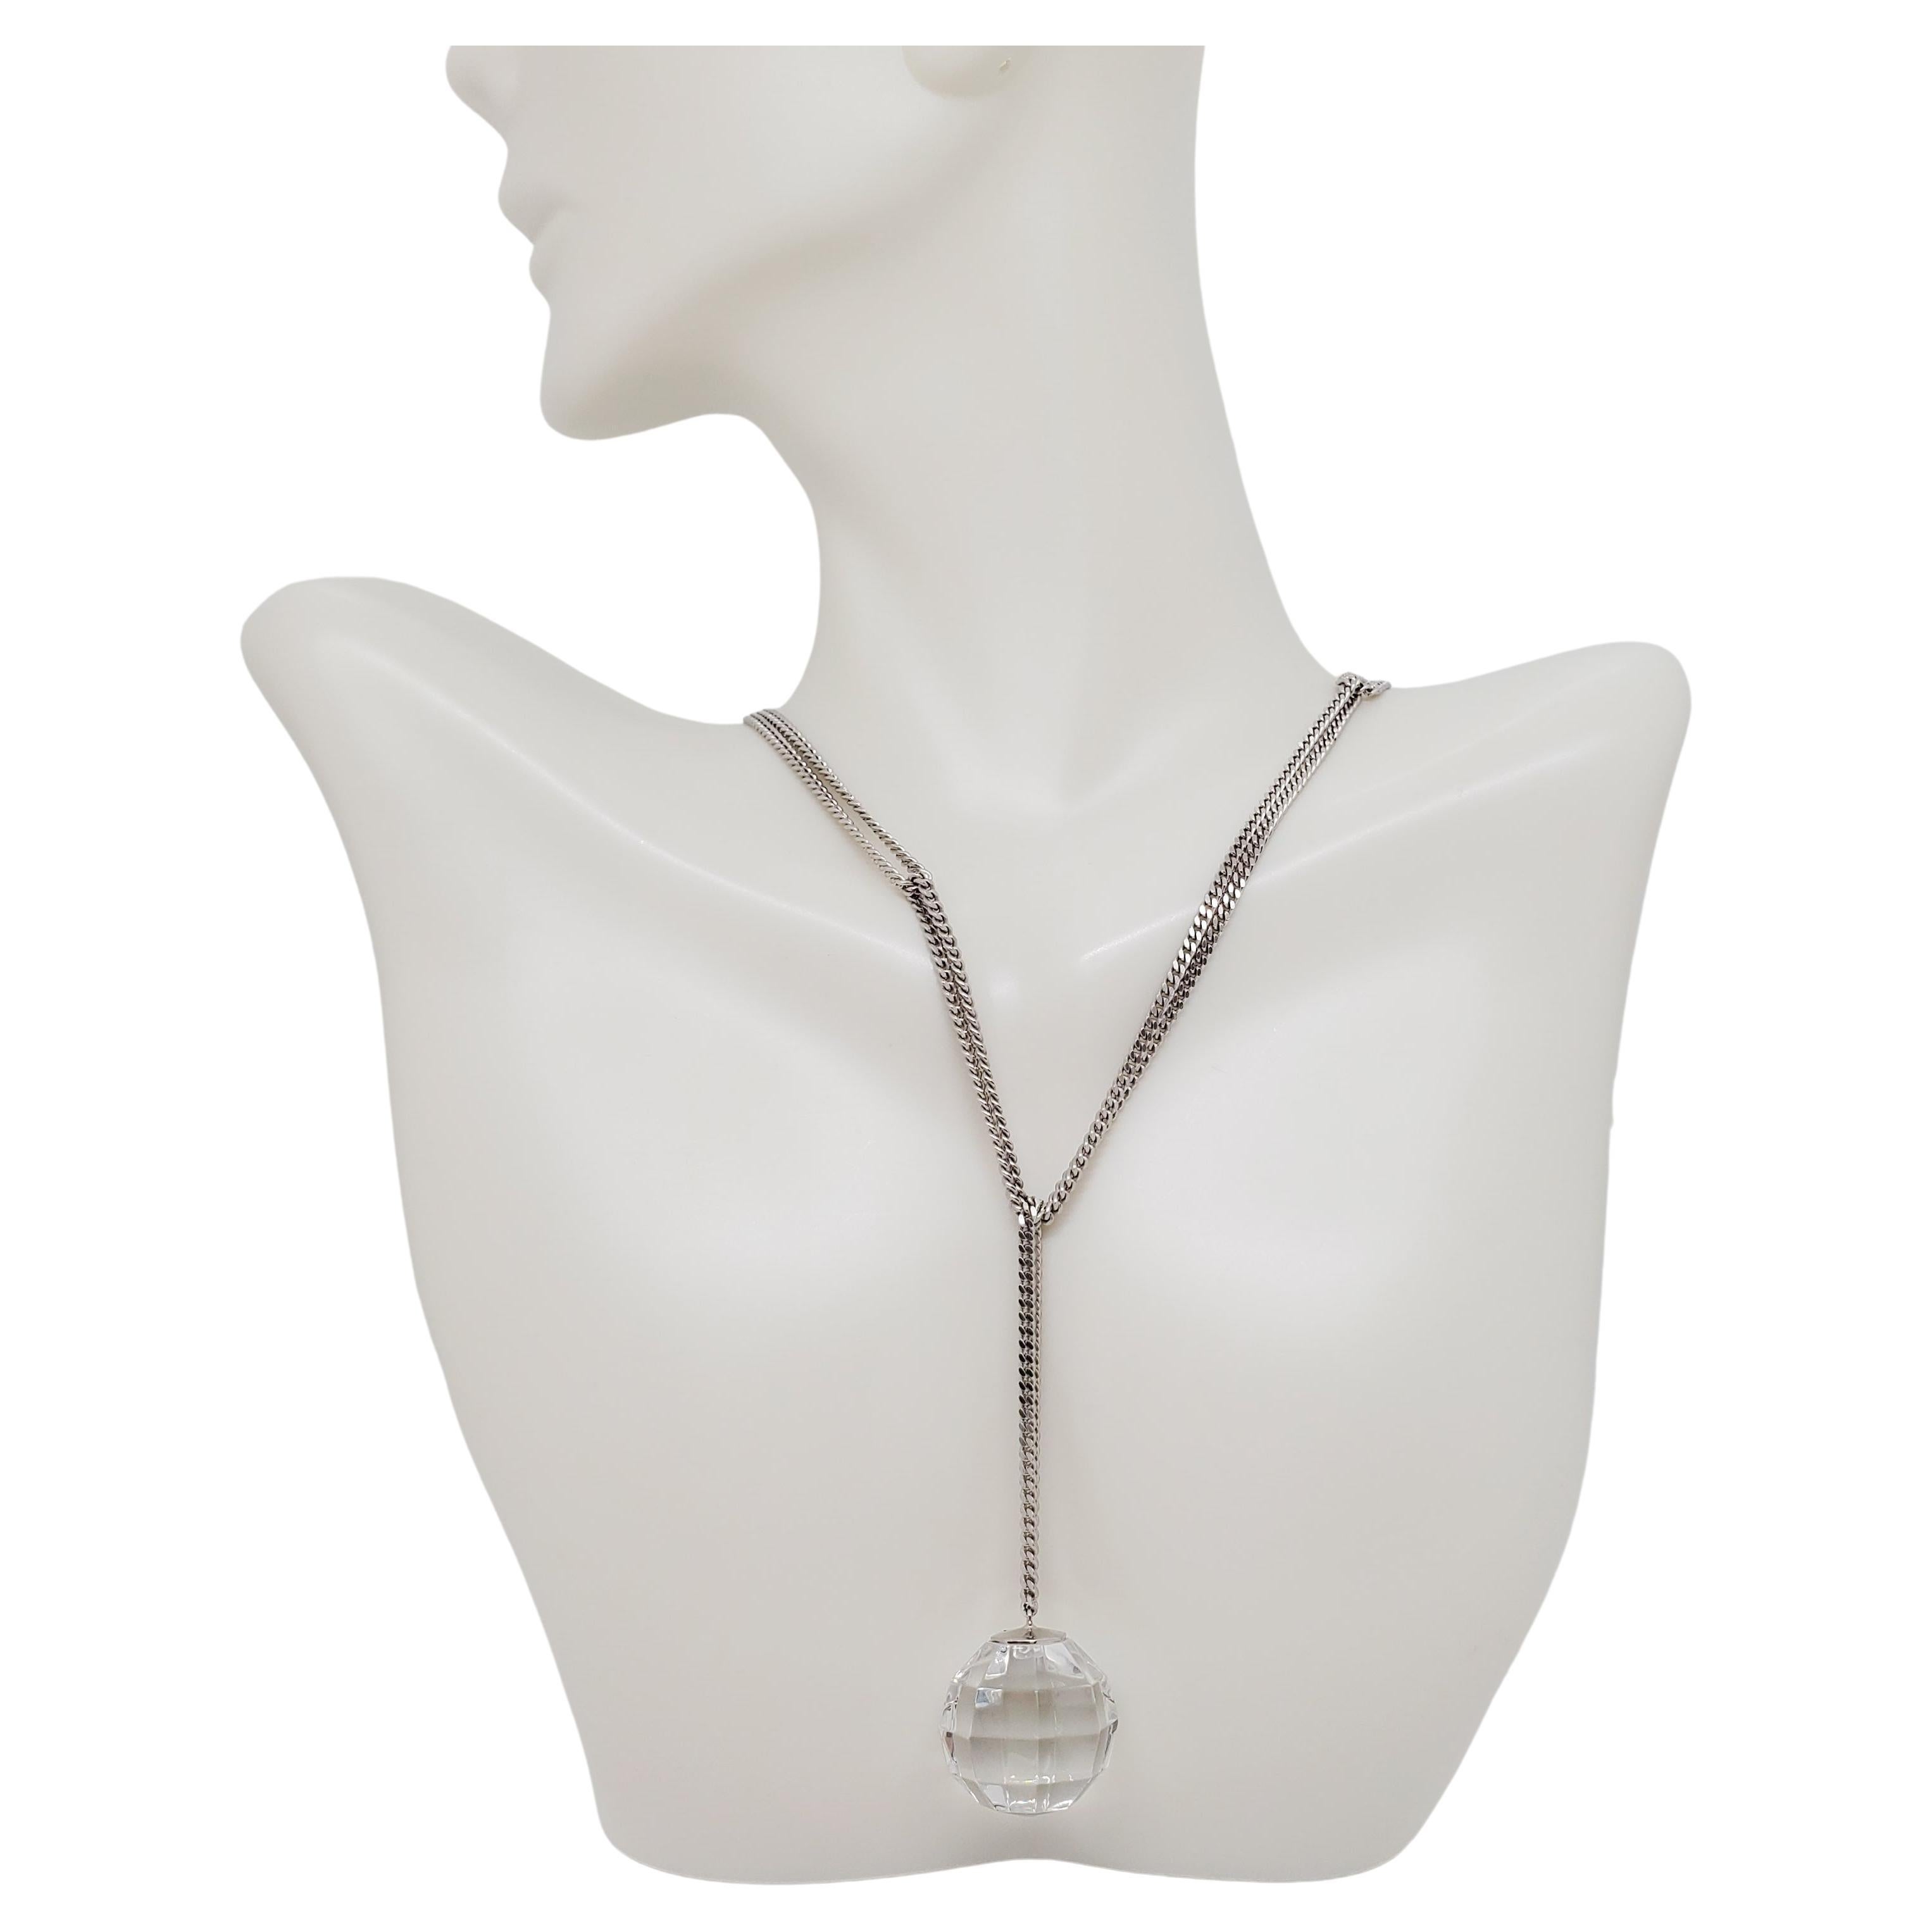 Beautiful Baccarat faceted sphere silver necklace.  Length is 19